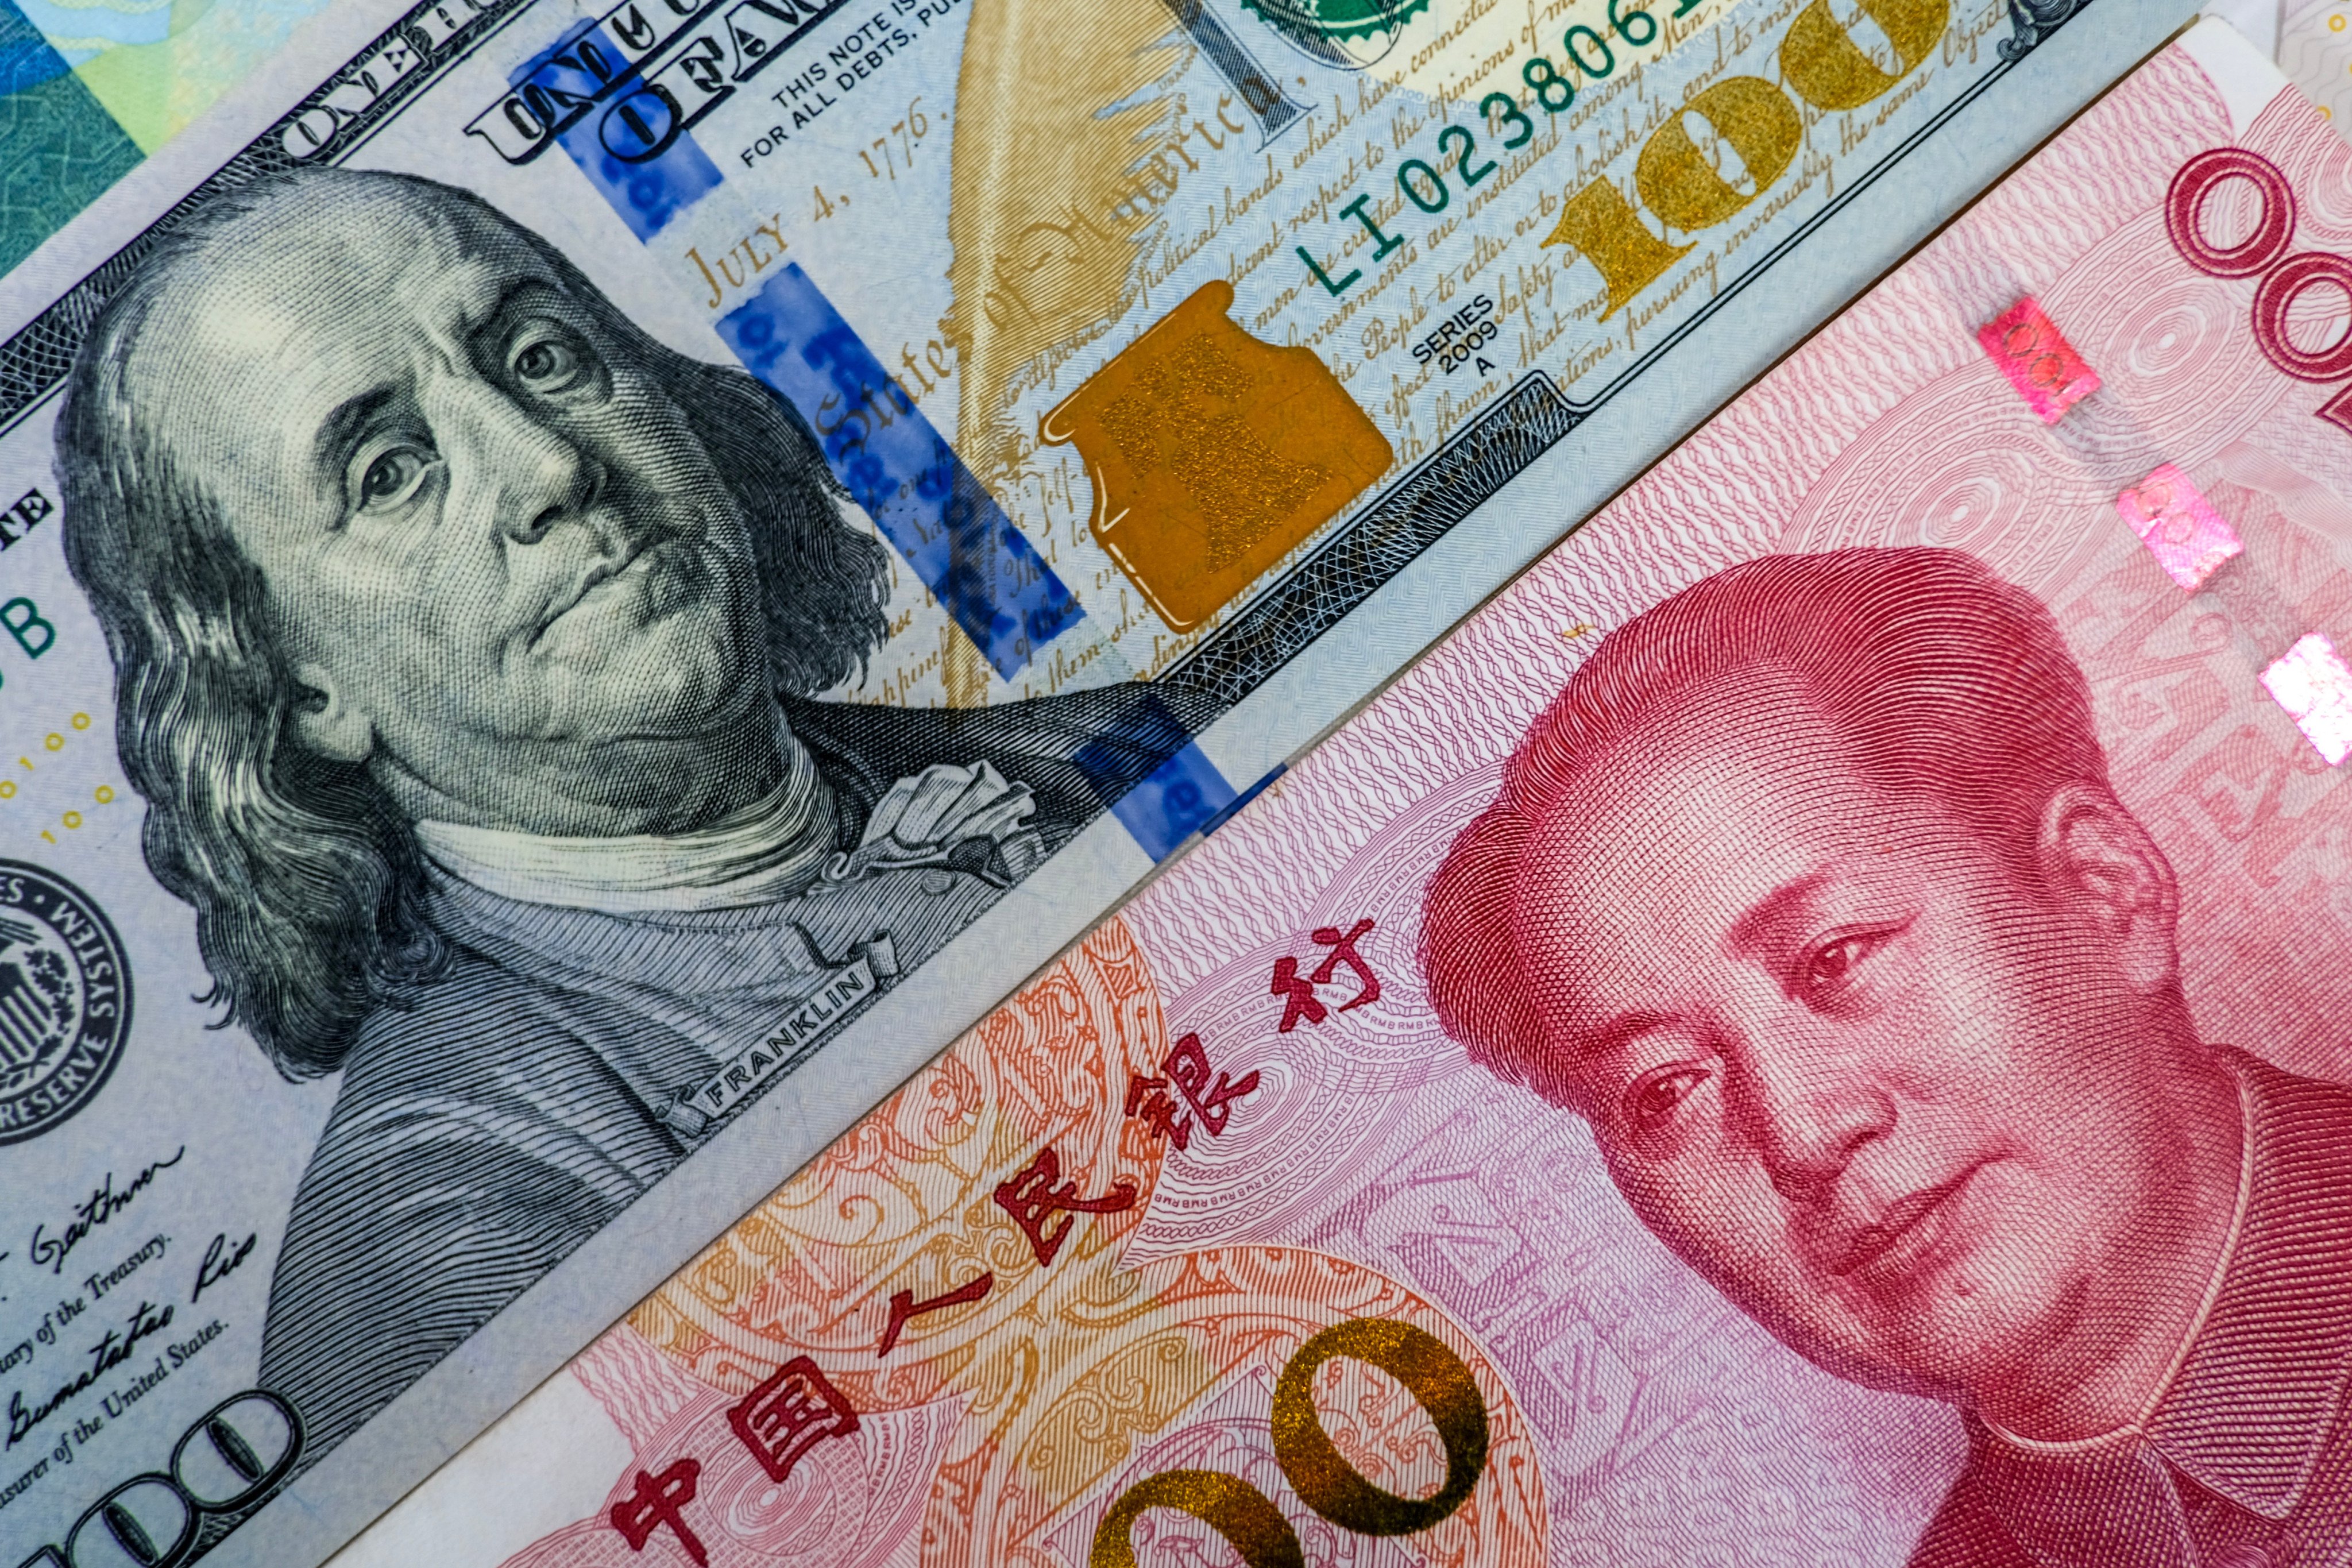 China’s unofficial dollar peg is transferring the pressure of dollar collapse fears to US bonds but the growing conflict in the Middle East could tip the balance. Photo: Shutterstock